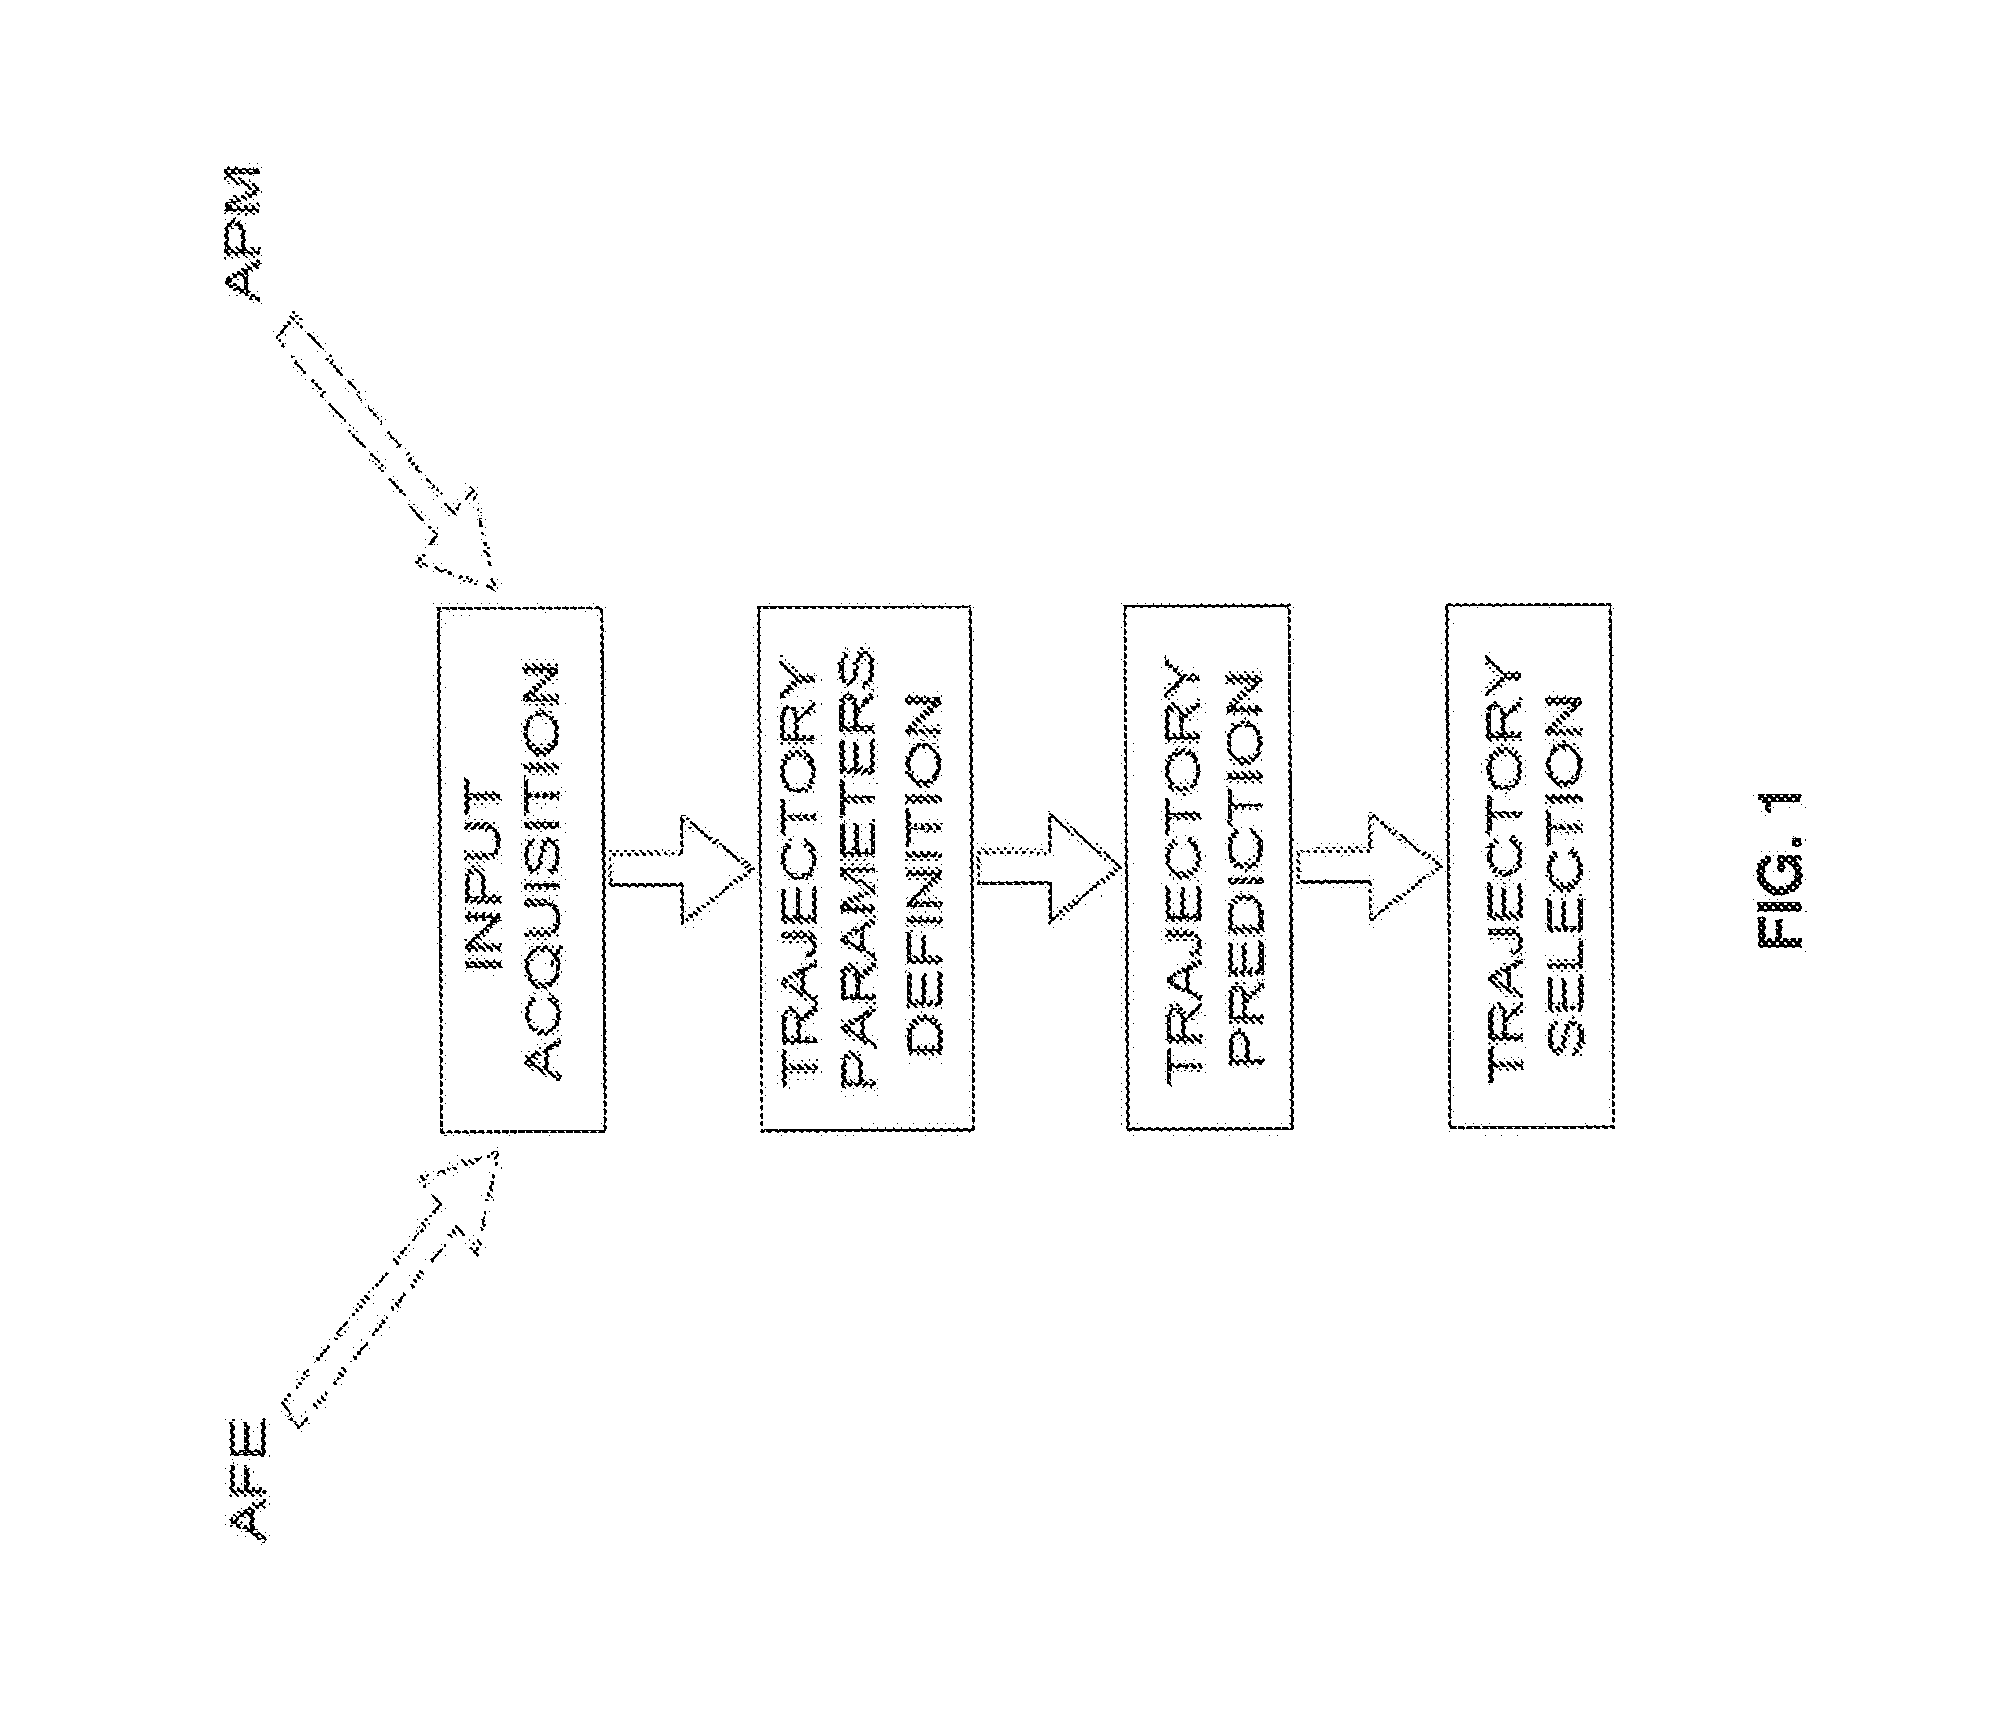 System and Method for Defining and Predicting Aircraft Trajectories